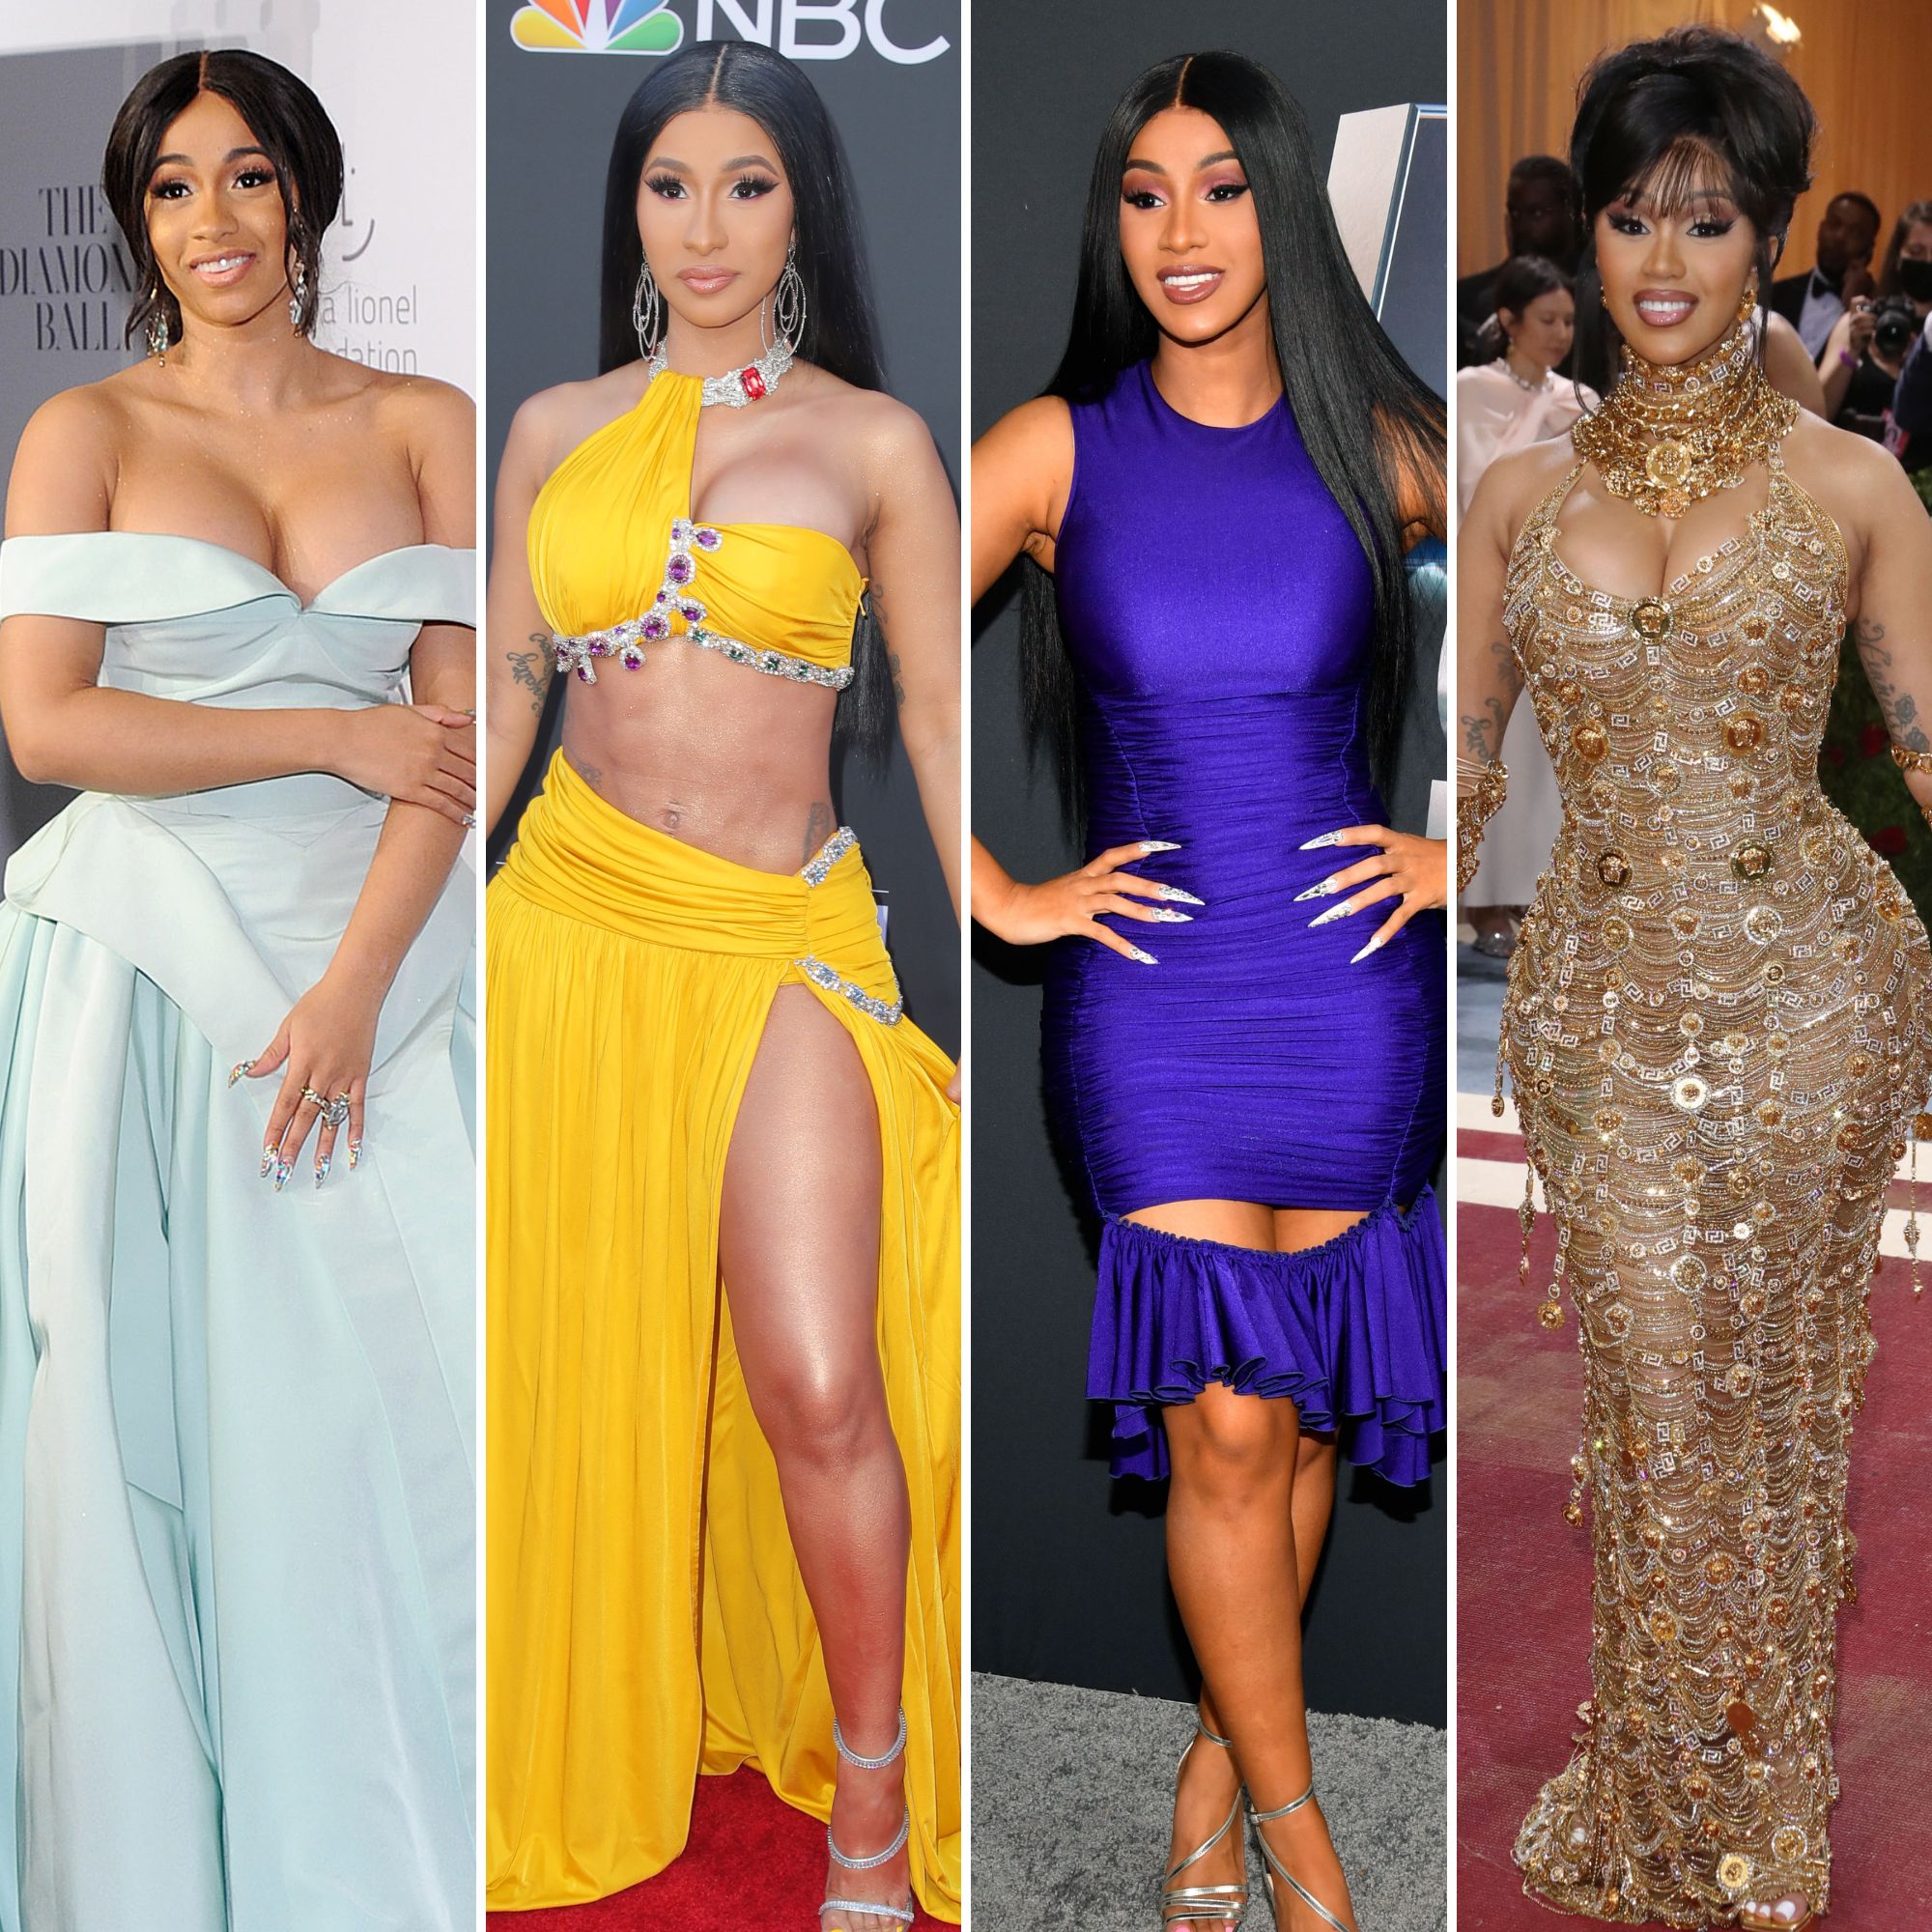 Raj Wap Police Girl With Girl Xxx Videos - Cardi B's Best Red Carpet Moments and Style Evolution